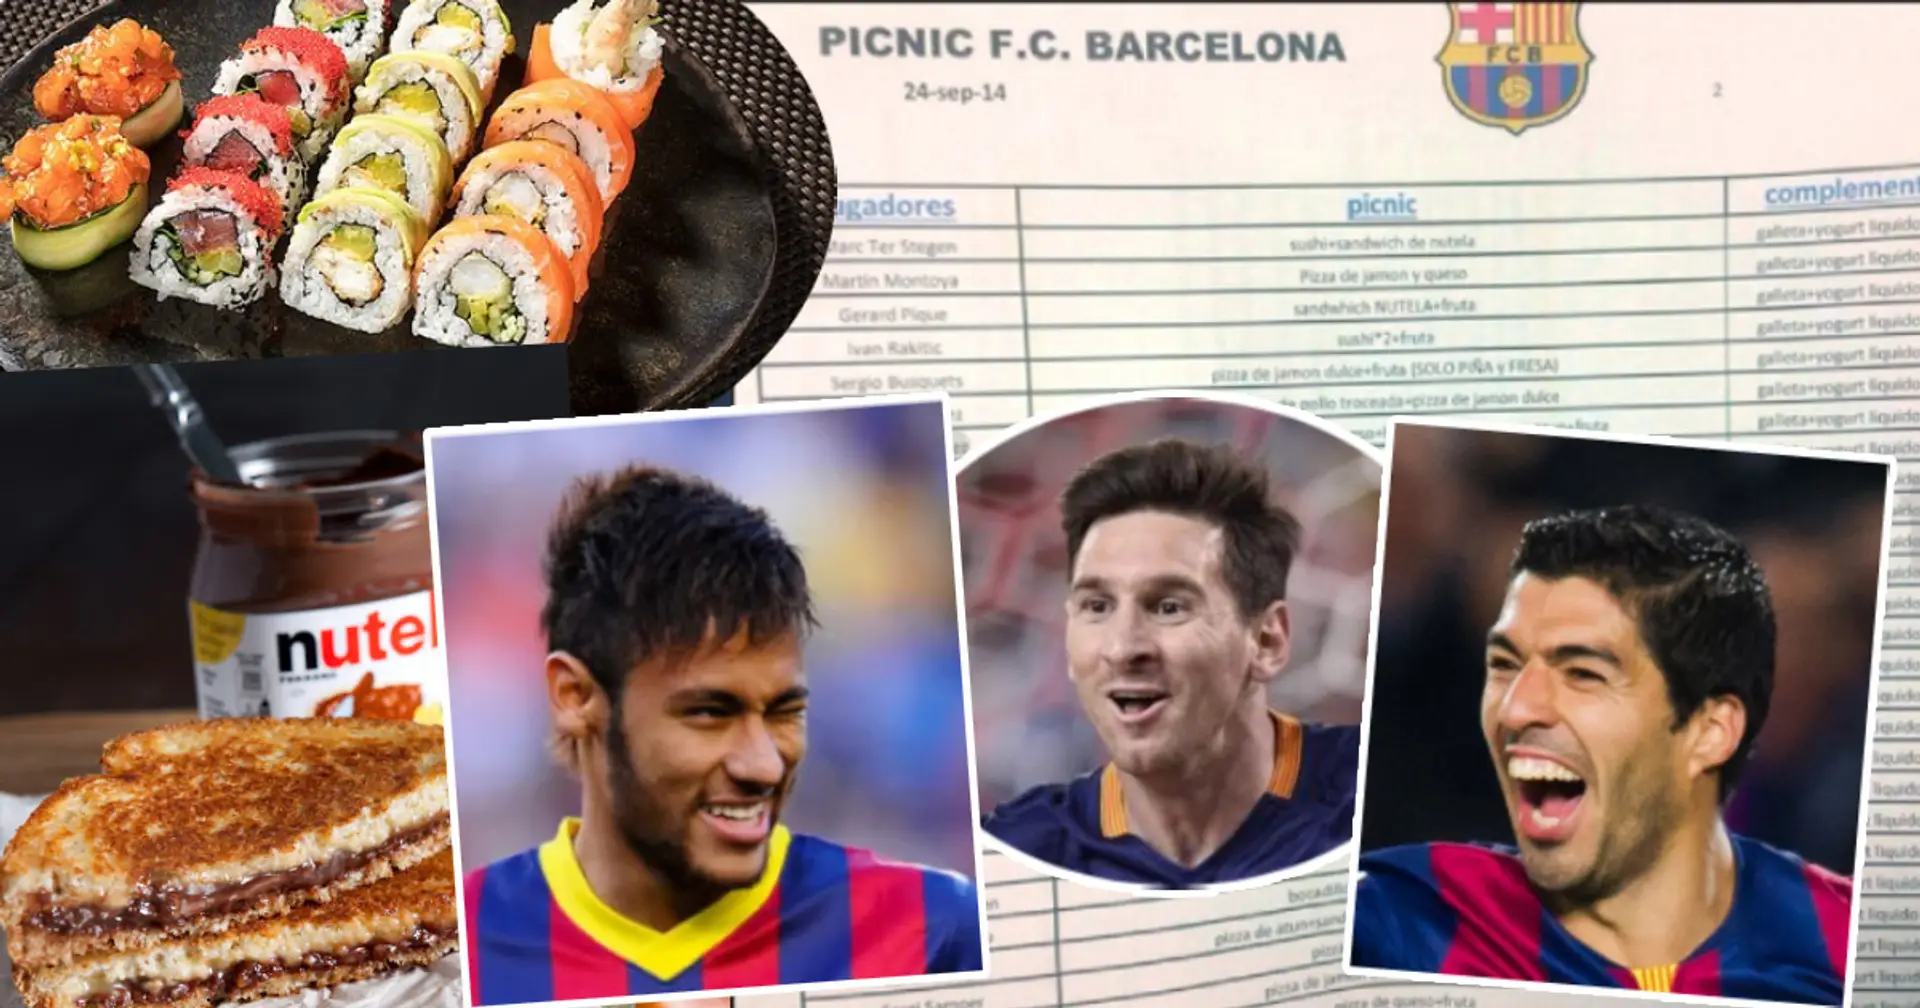 Cheese pizza for Messi, Nutella sandwich for Ter Stegen: Leaked list from 2014 shows Barca players' eating habits